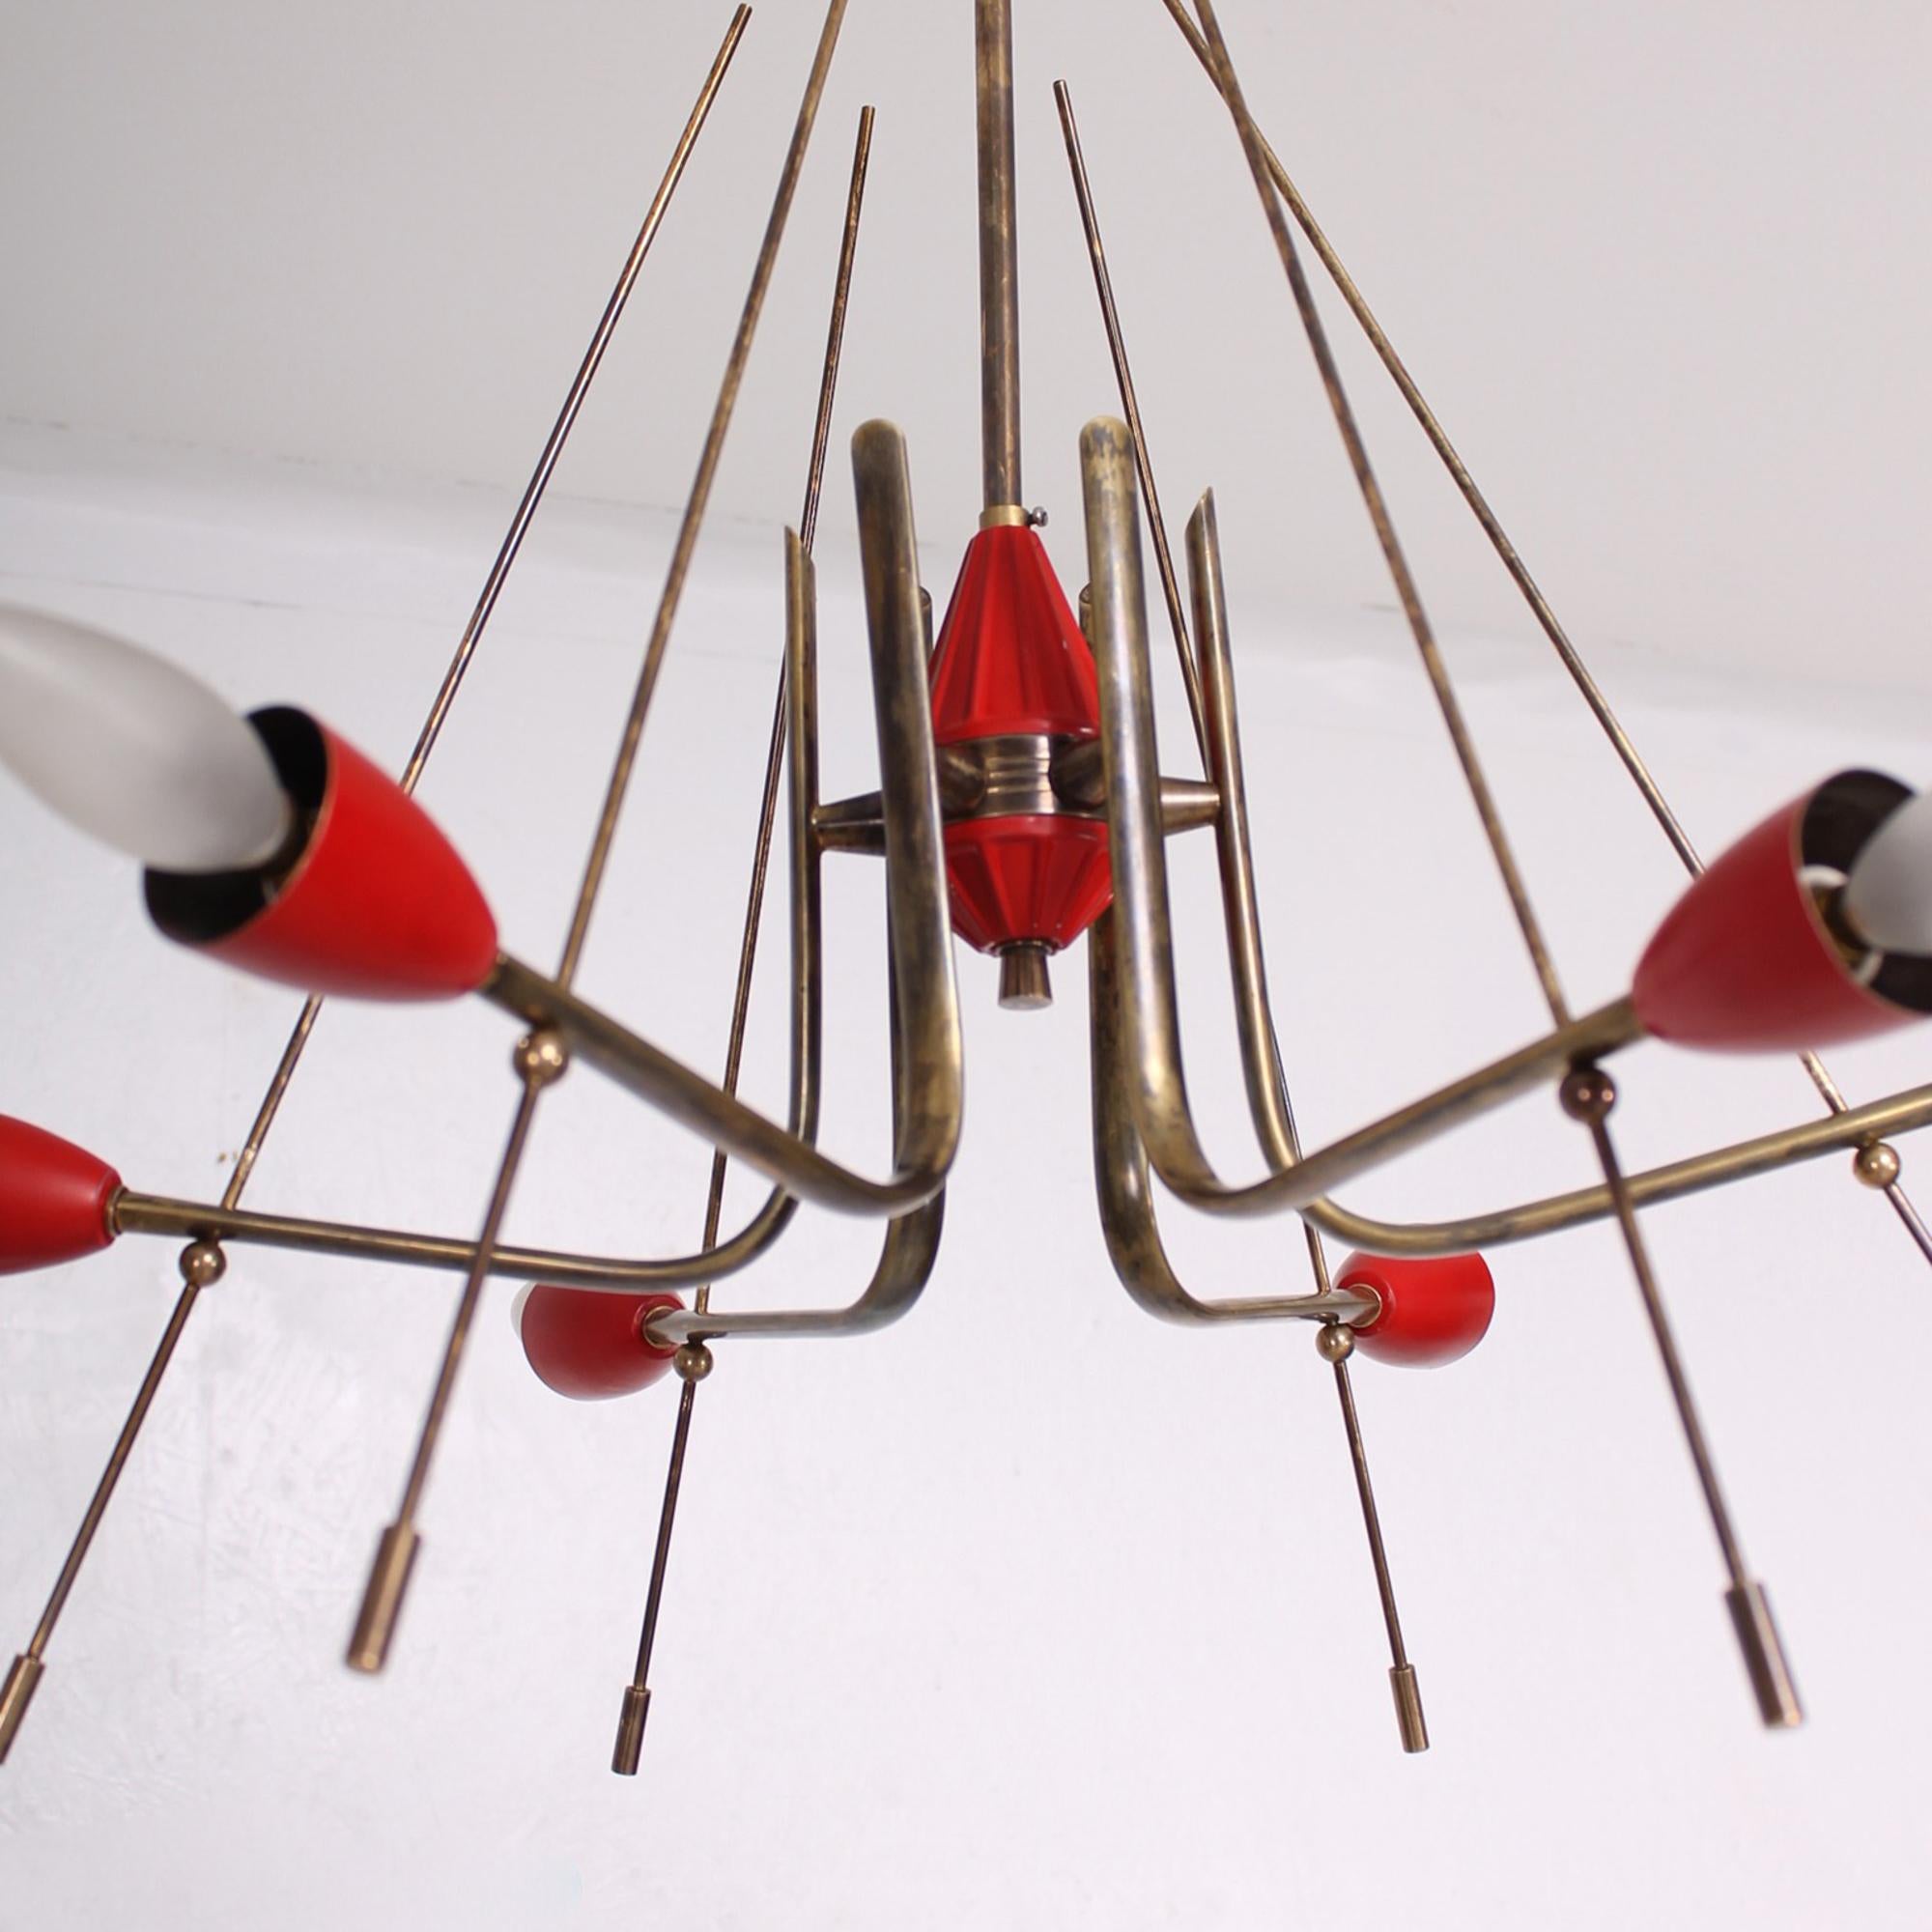 Italian STILNOVO Atomic Futuristic Solid Brass Chandelier Painted Red Italy 1950s